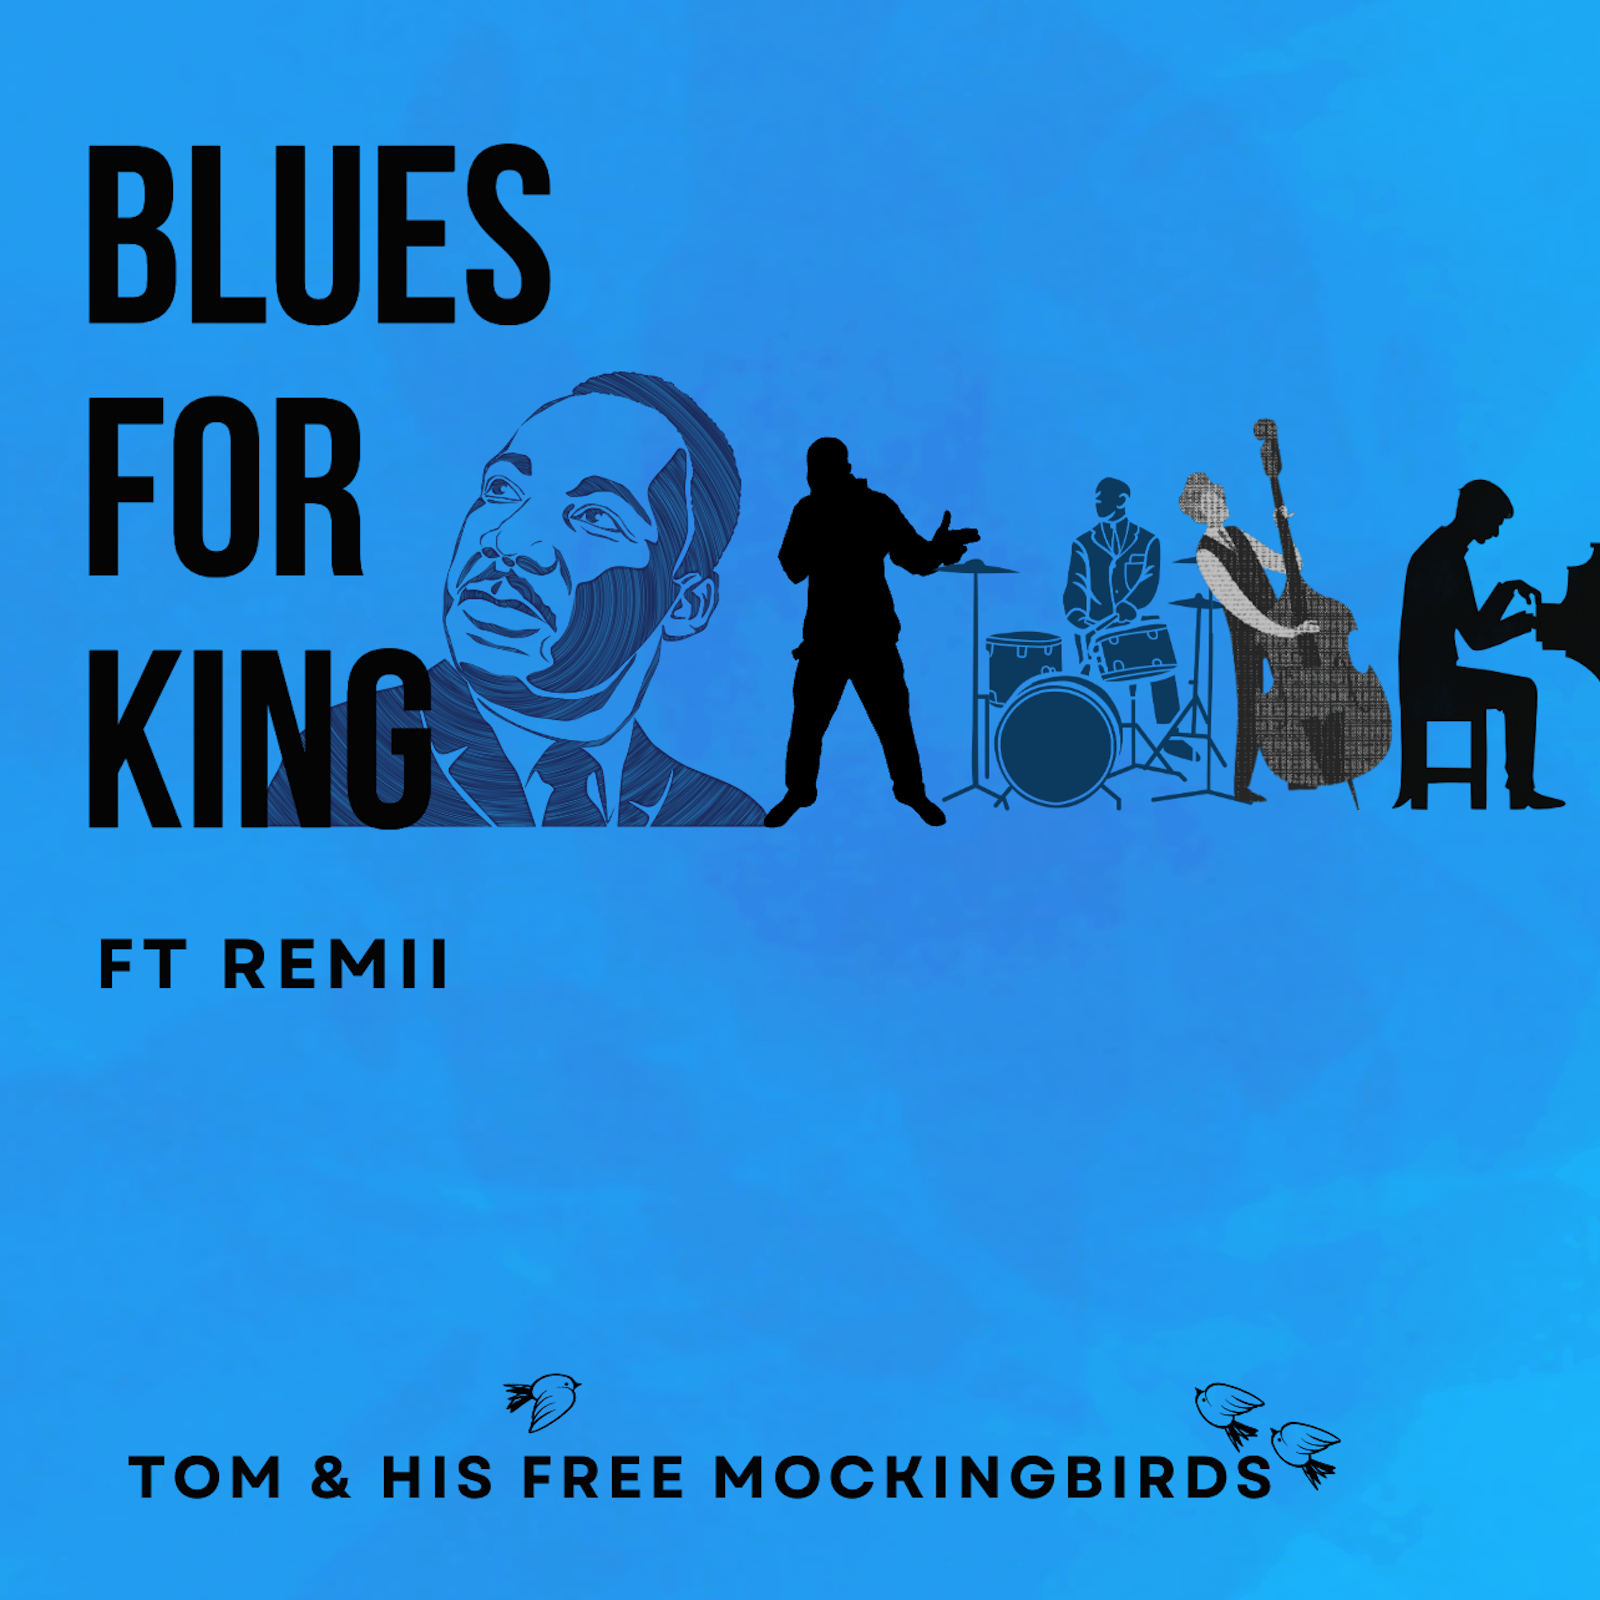 Tom & His Free Mockingbirds’ Latest Single: A Musical Journey Inspired by Martin Luther King Jr on the Bafana FM Digital Playlist